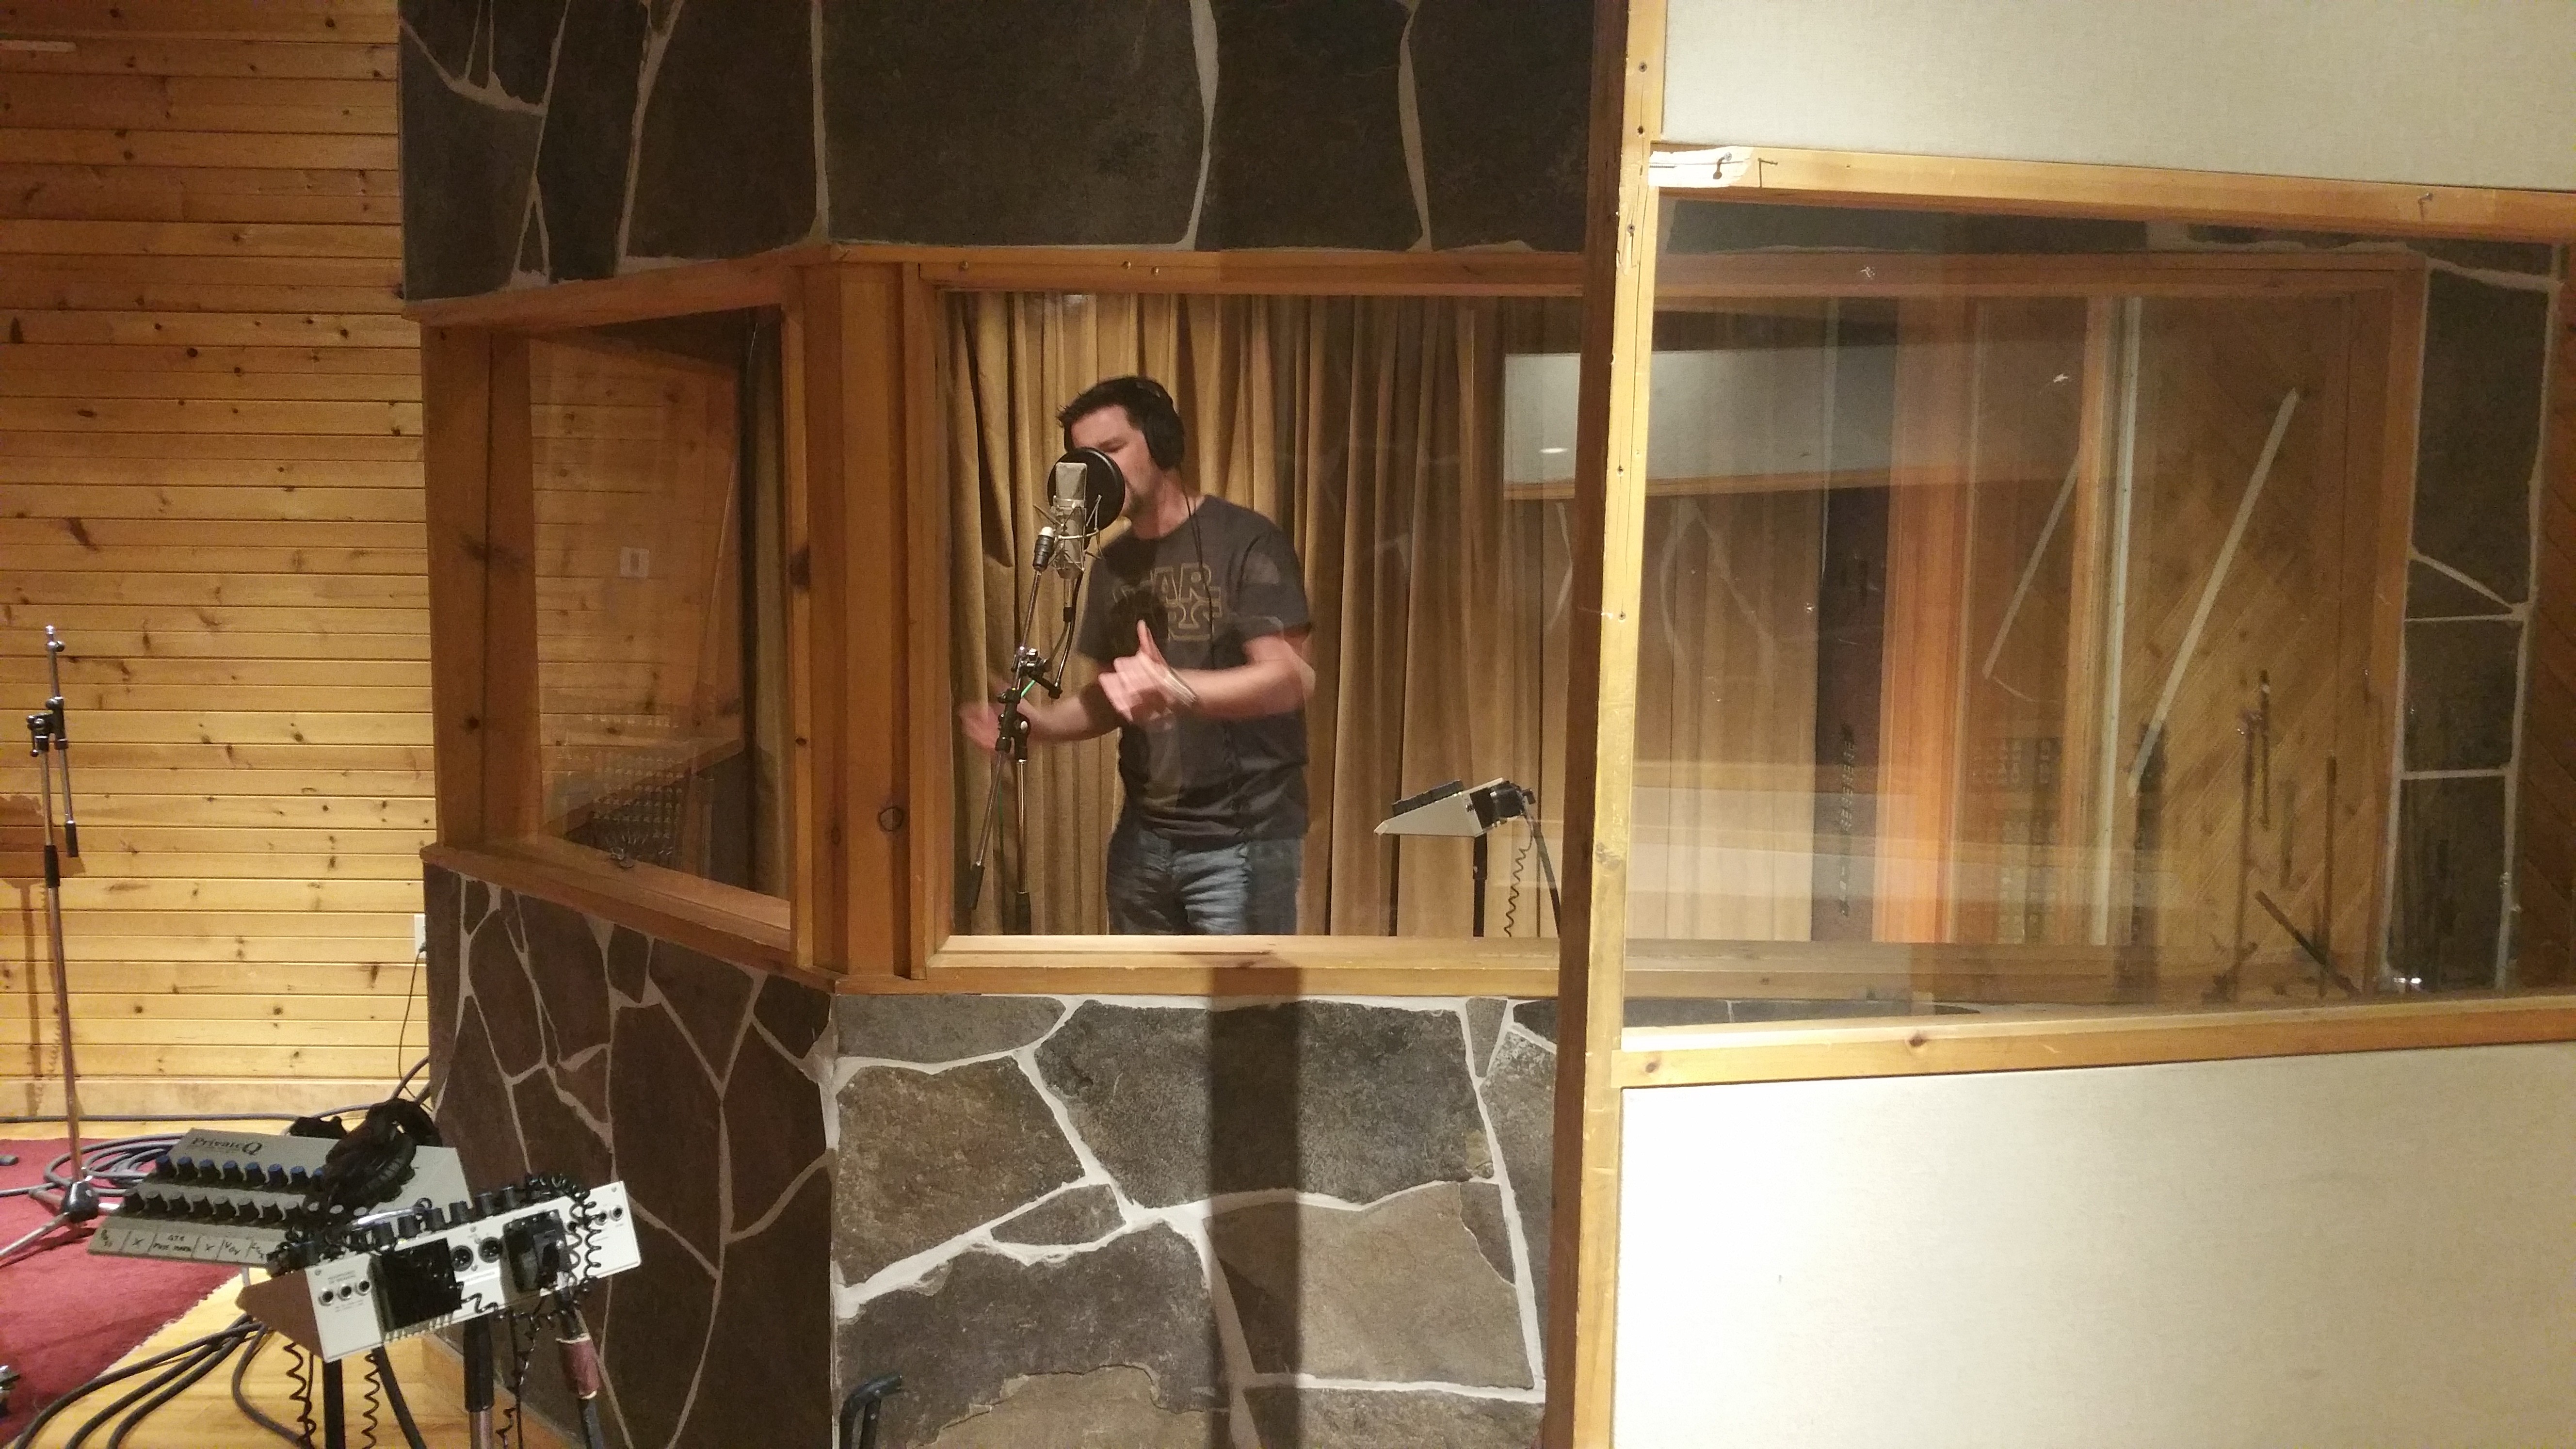 James Downham singing into a microphone in a recording studio.